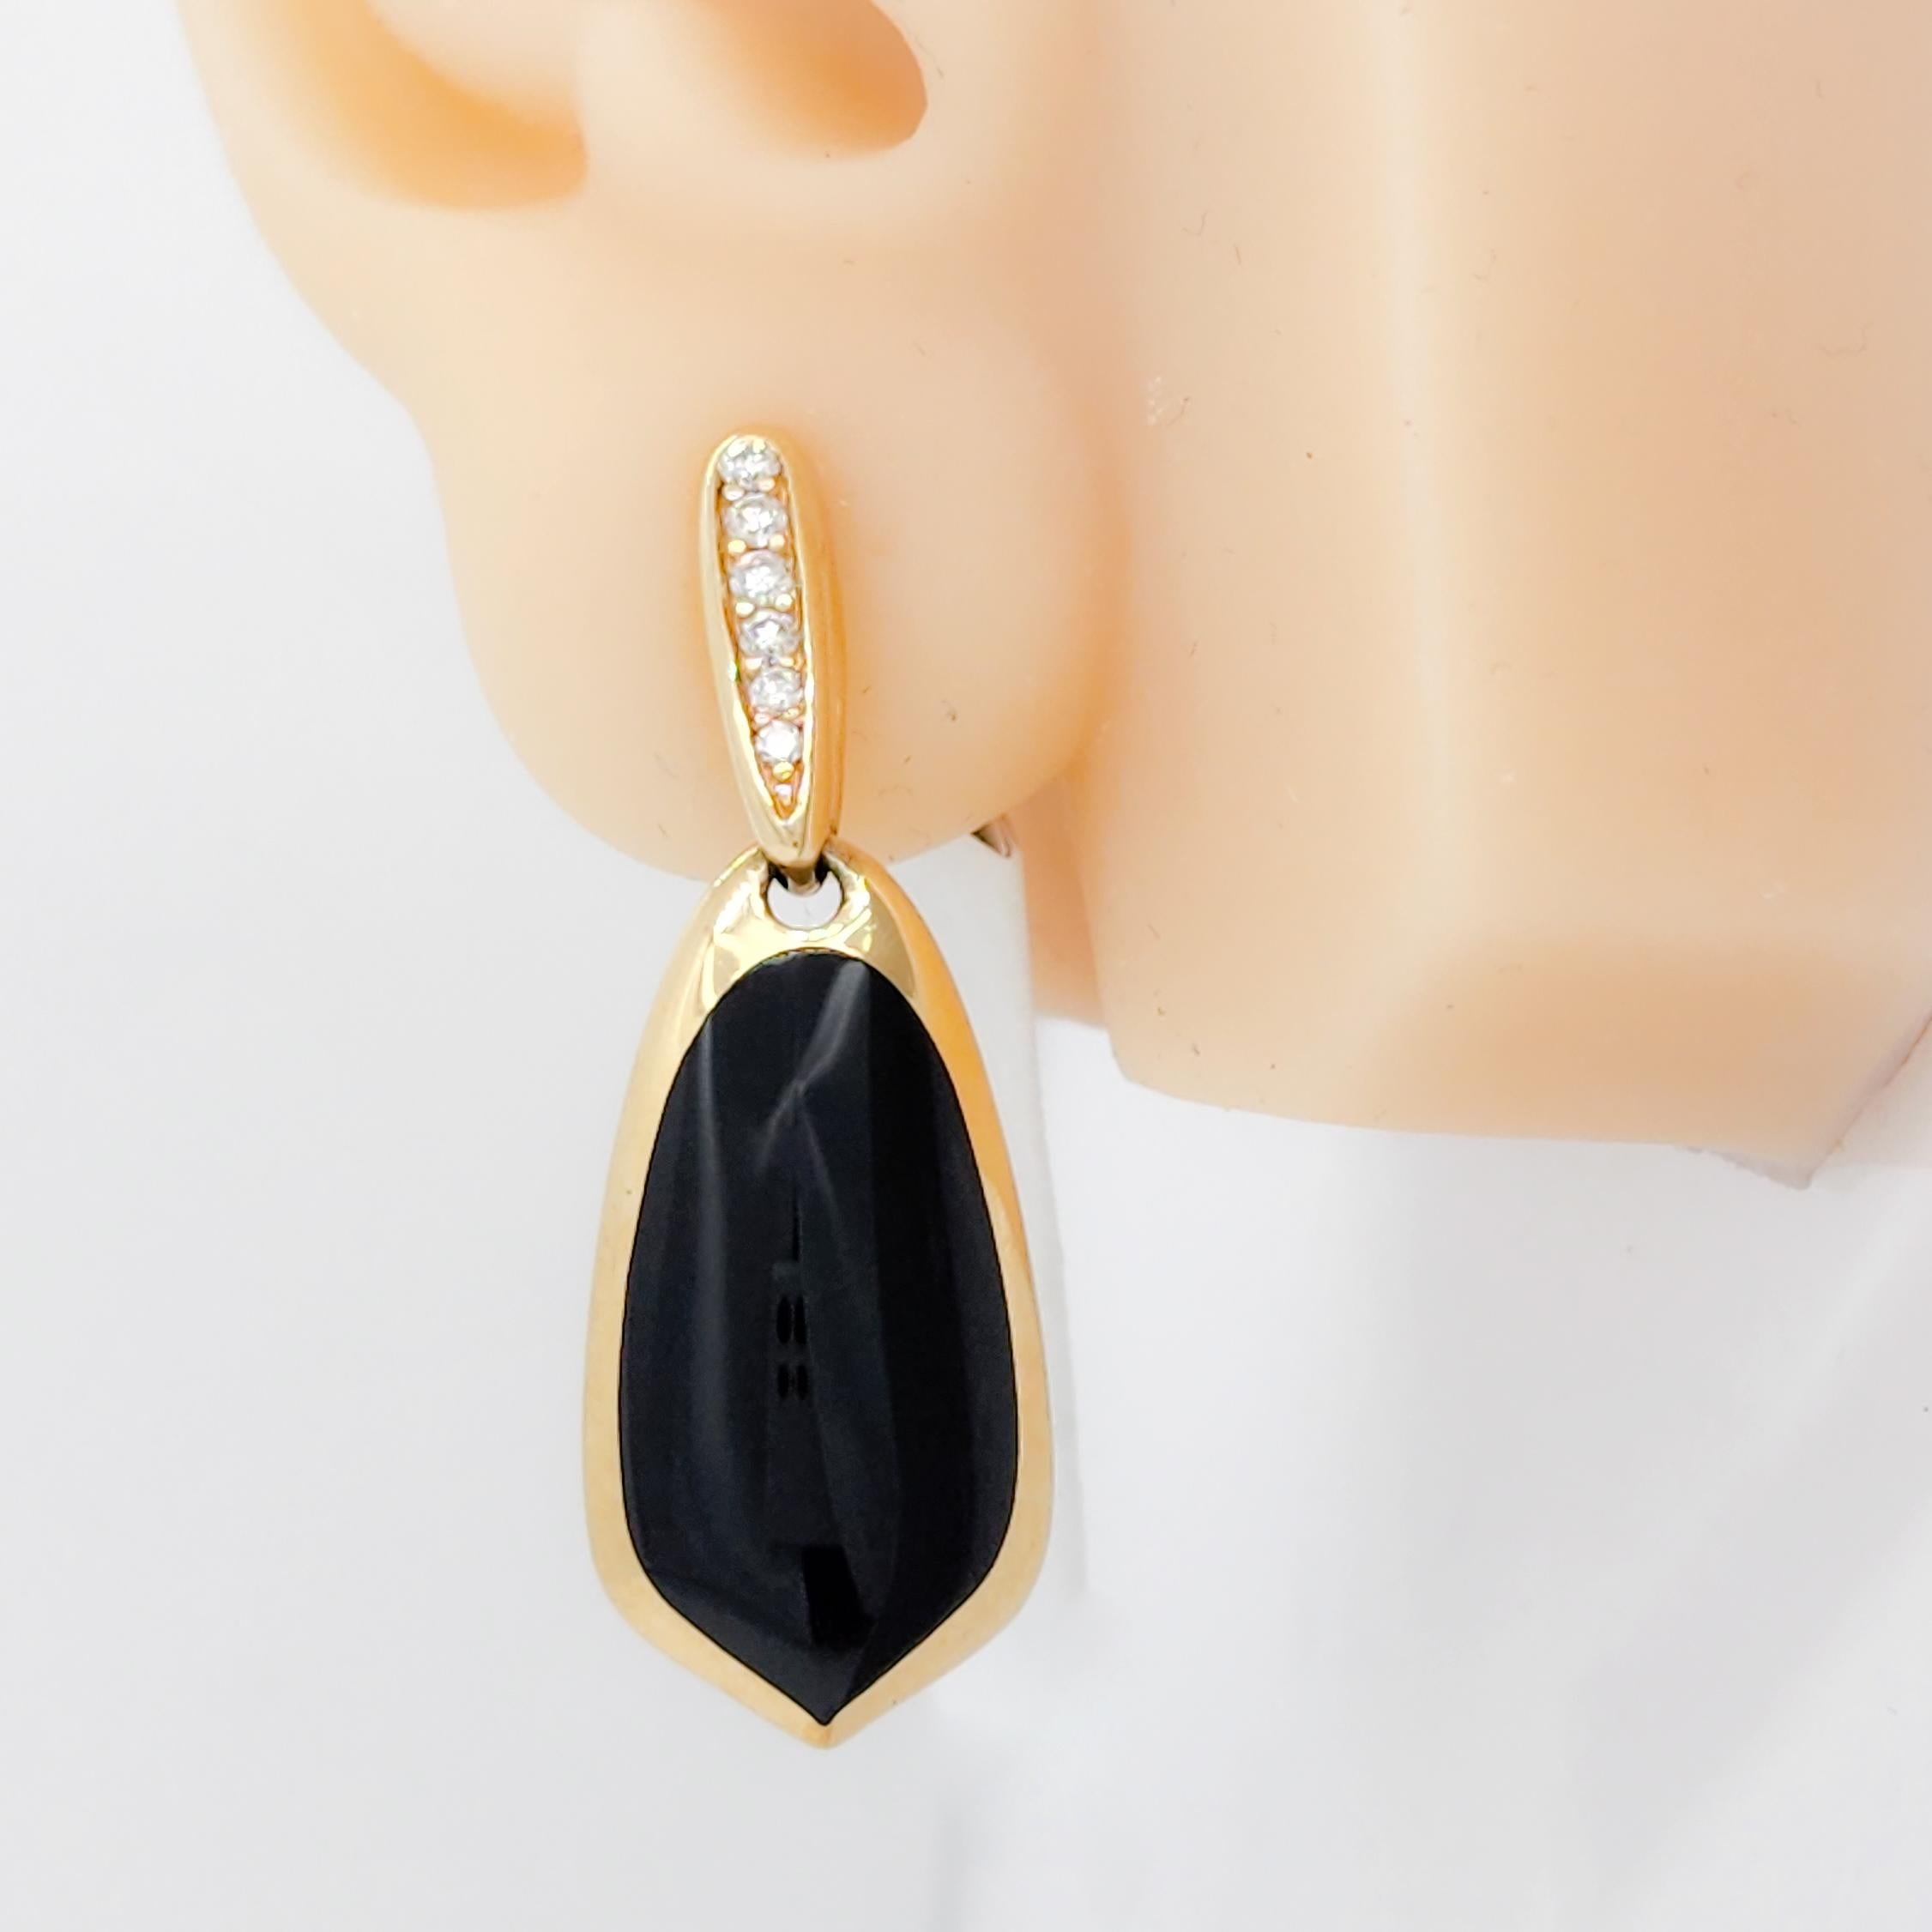 Gorgeous Kabana estate dangle earrings with two fancy shape onyx and 0.19 ct. good quality white diamond rounds.  Handmade in 14k yellow gold.  Made in the USA.